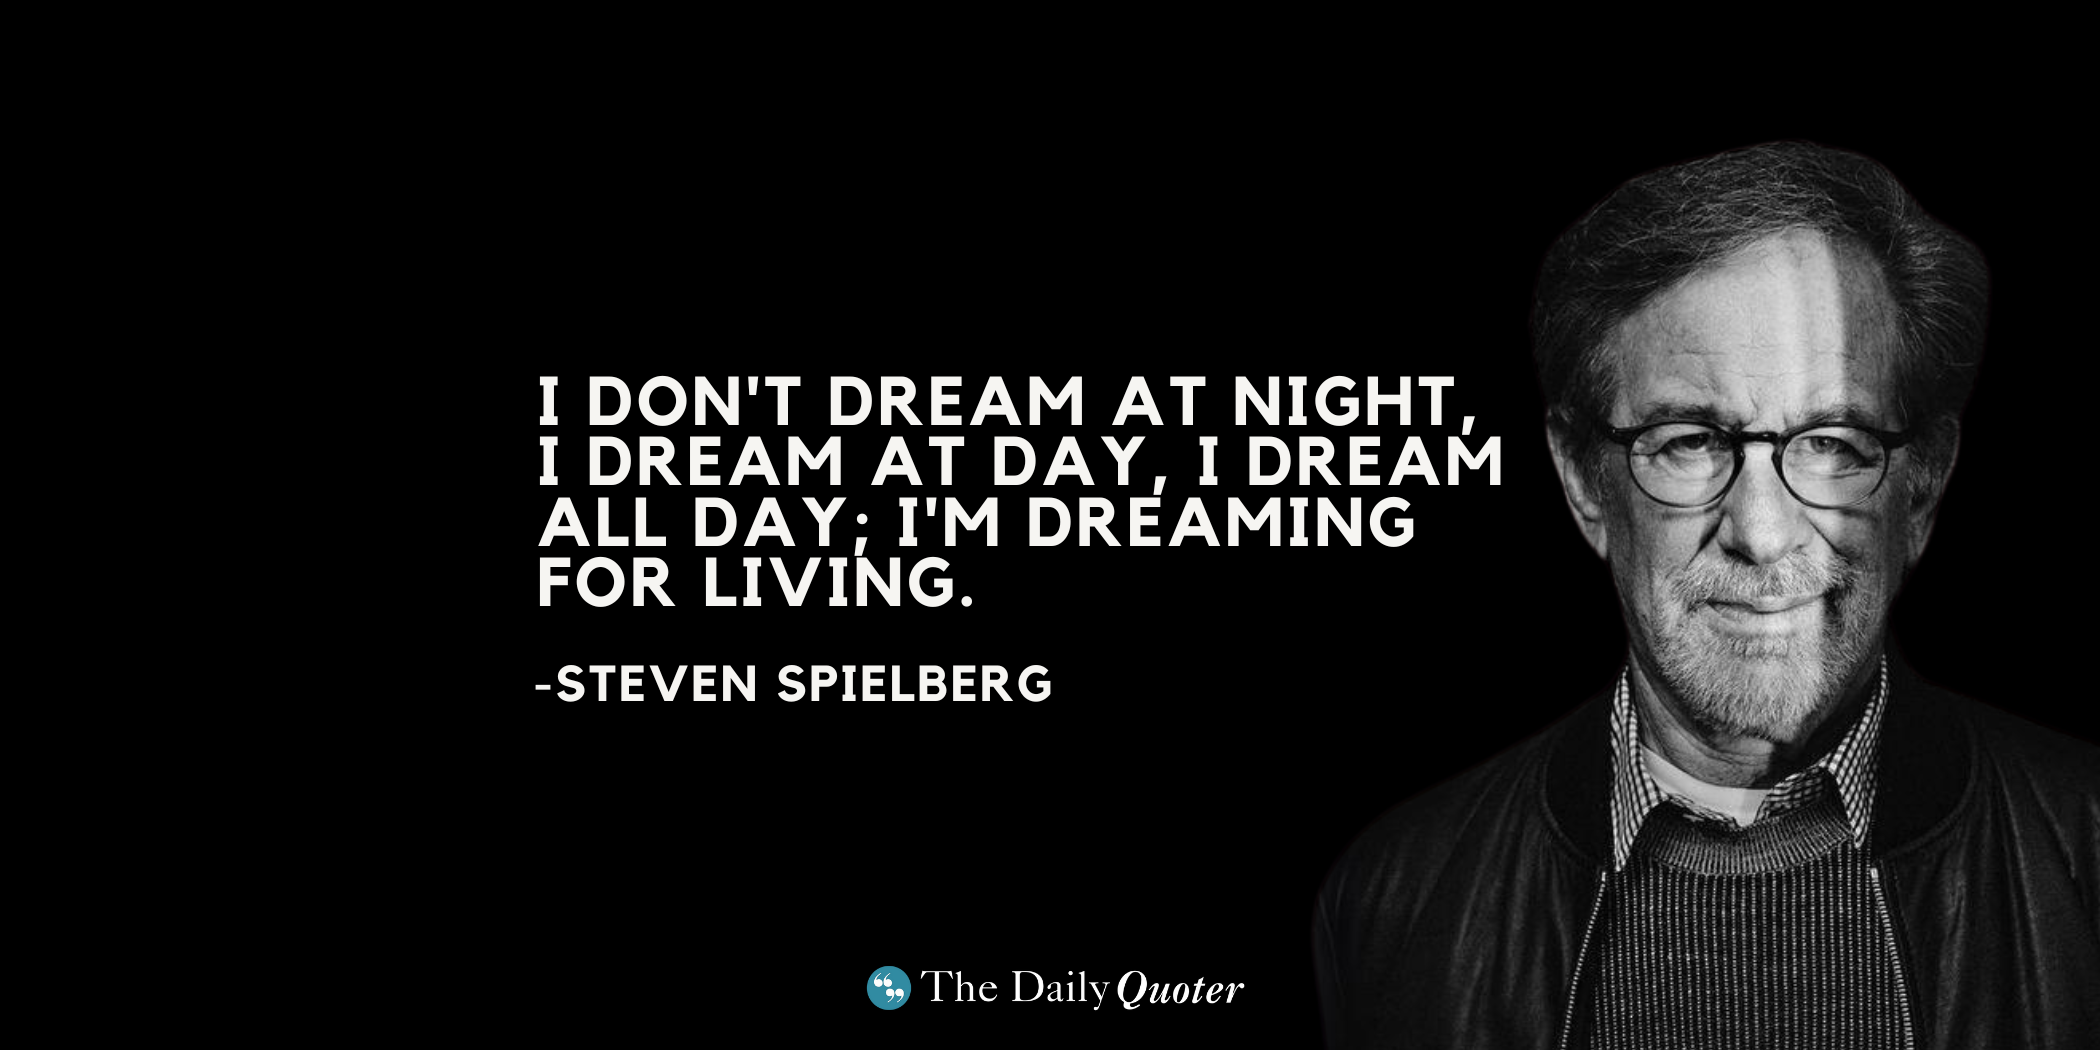 I don't dream at night, I dream at day, I dream all day; I'm dreaming for living. - Steven Spielberg